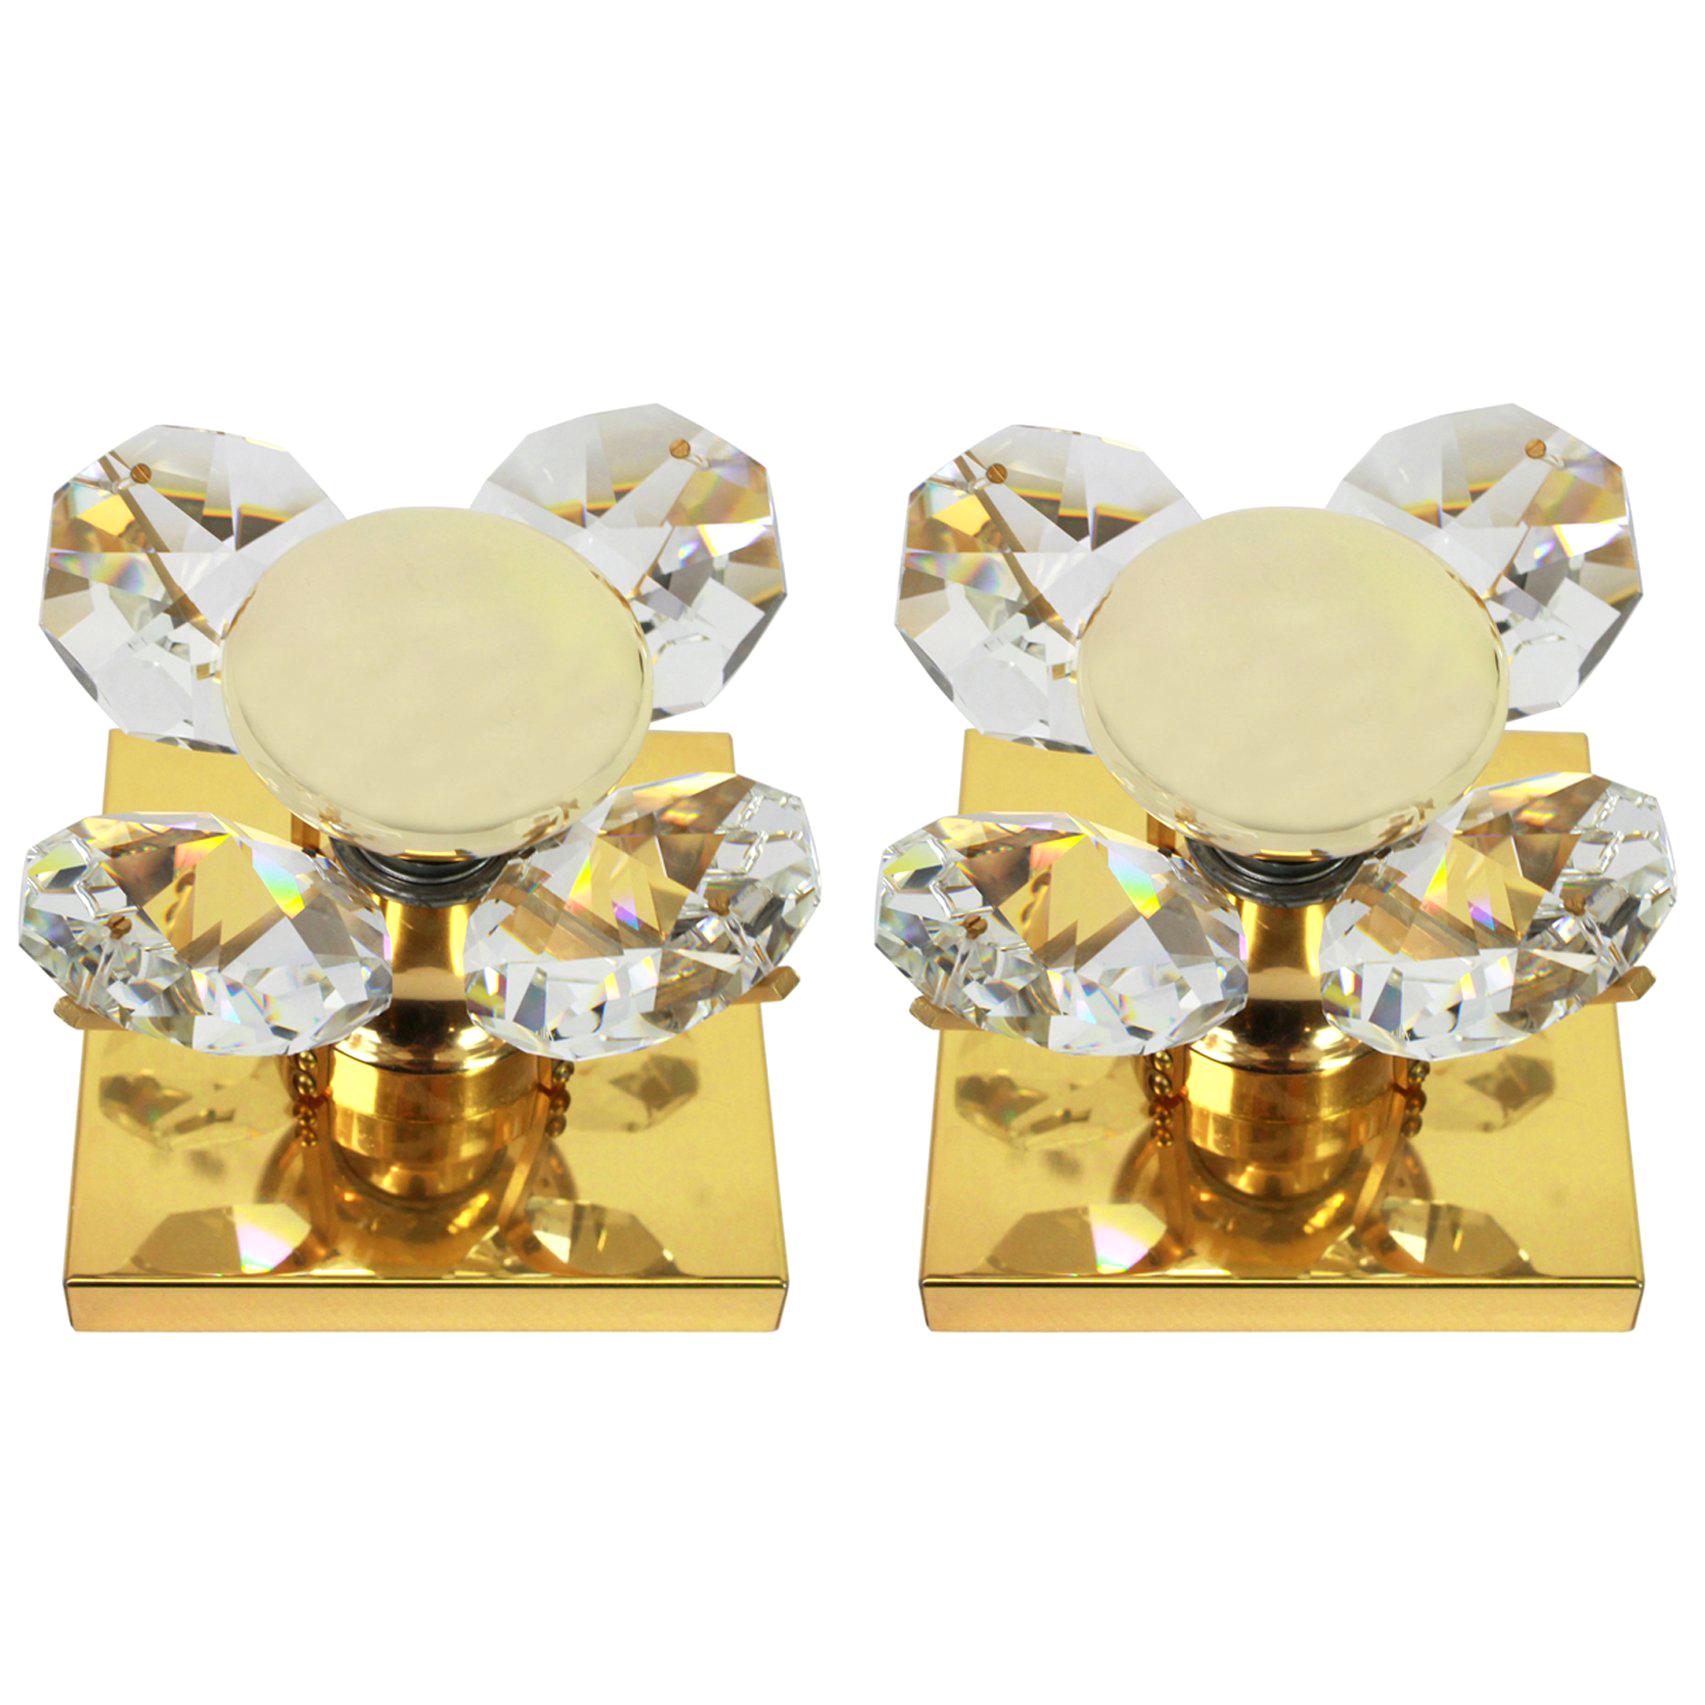 Wonderful Pair of Crystal Flower Sconces by Christoph Palme, Germany, 1970s